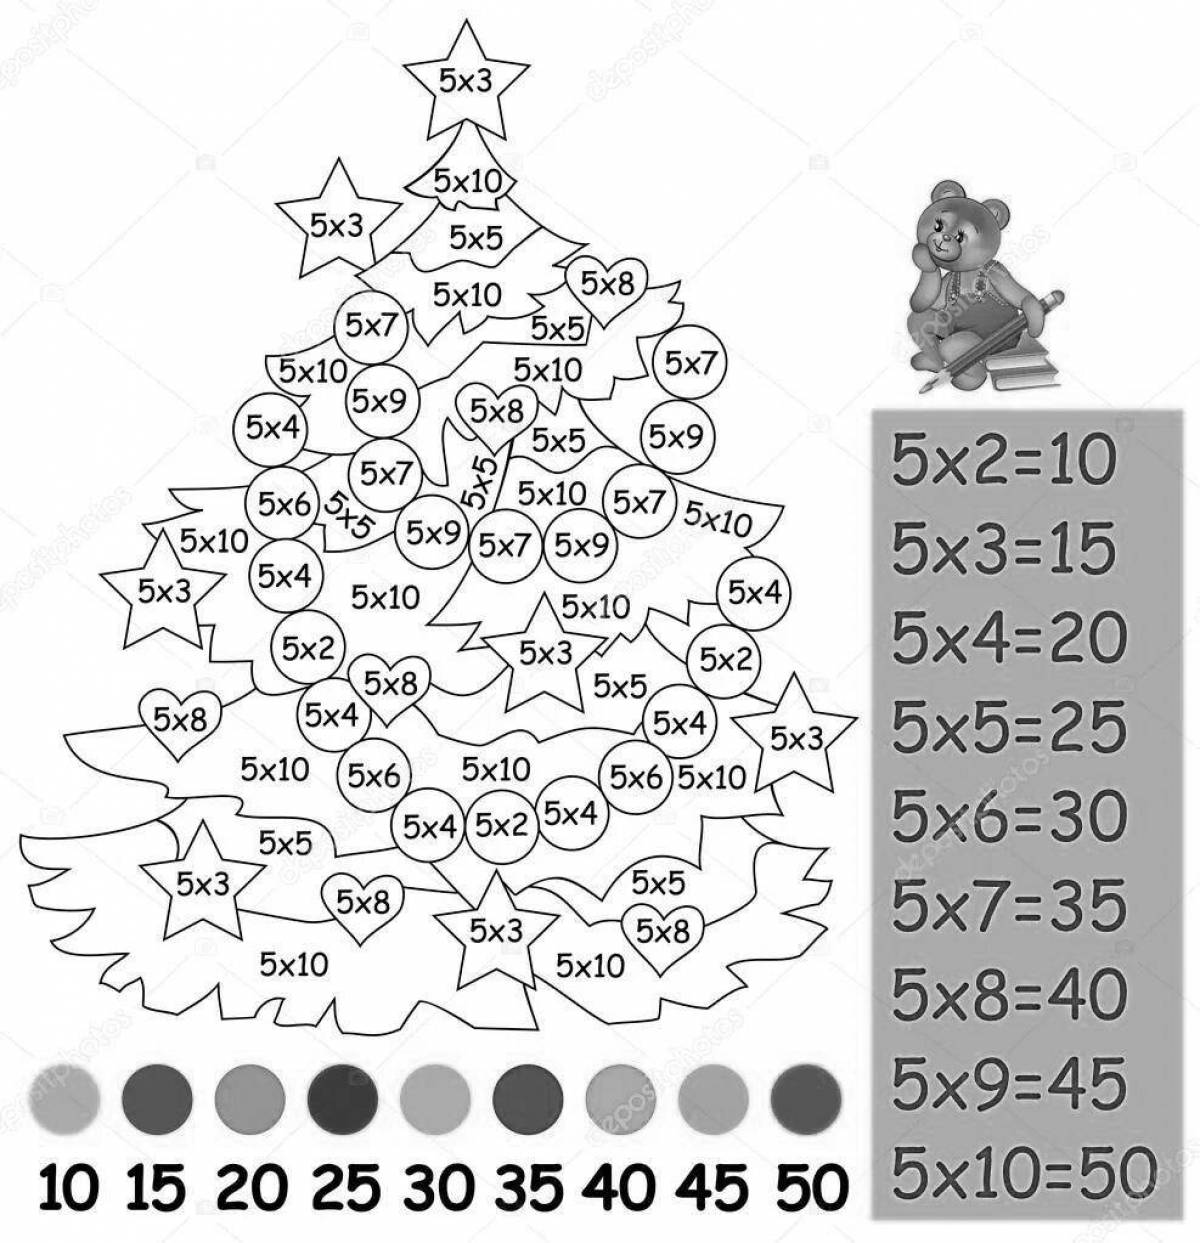 Playful multiplication table for 6